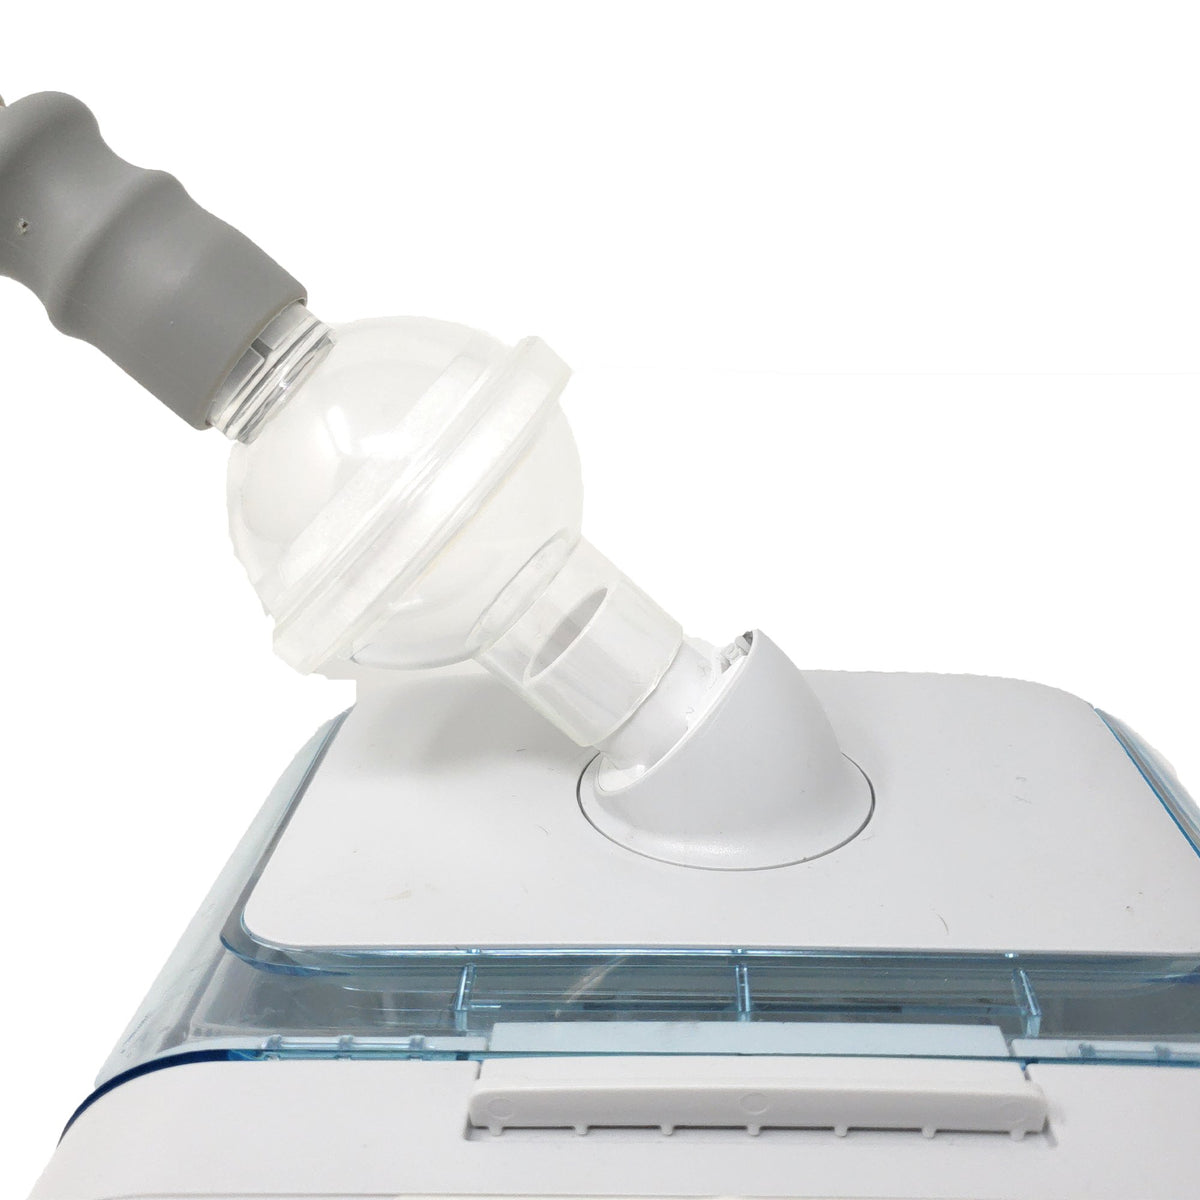 NEW Universal Fit in-Line Bacterial Viral Filter for CPAP and BiPAP Machines - Mars Med Supply